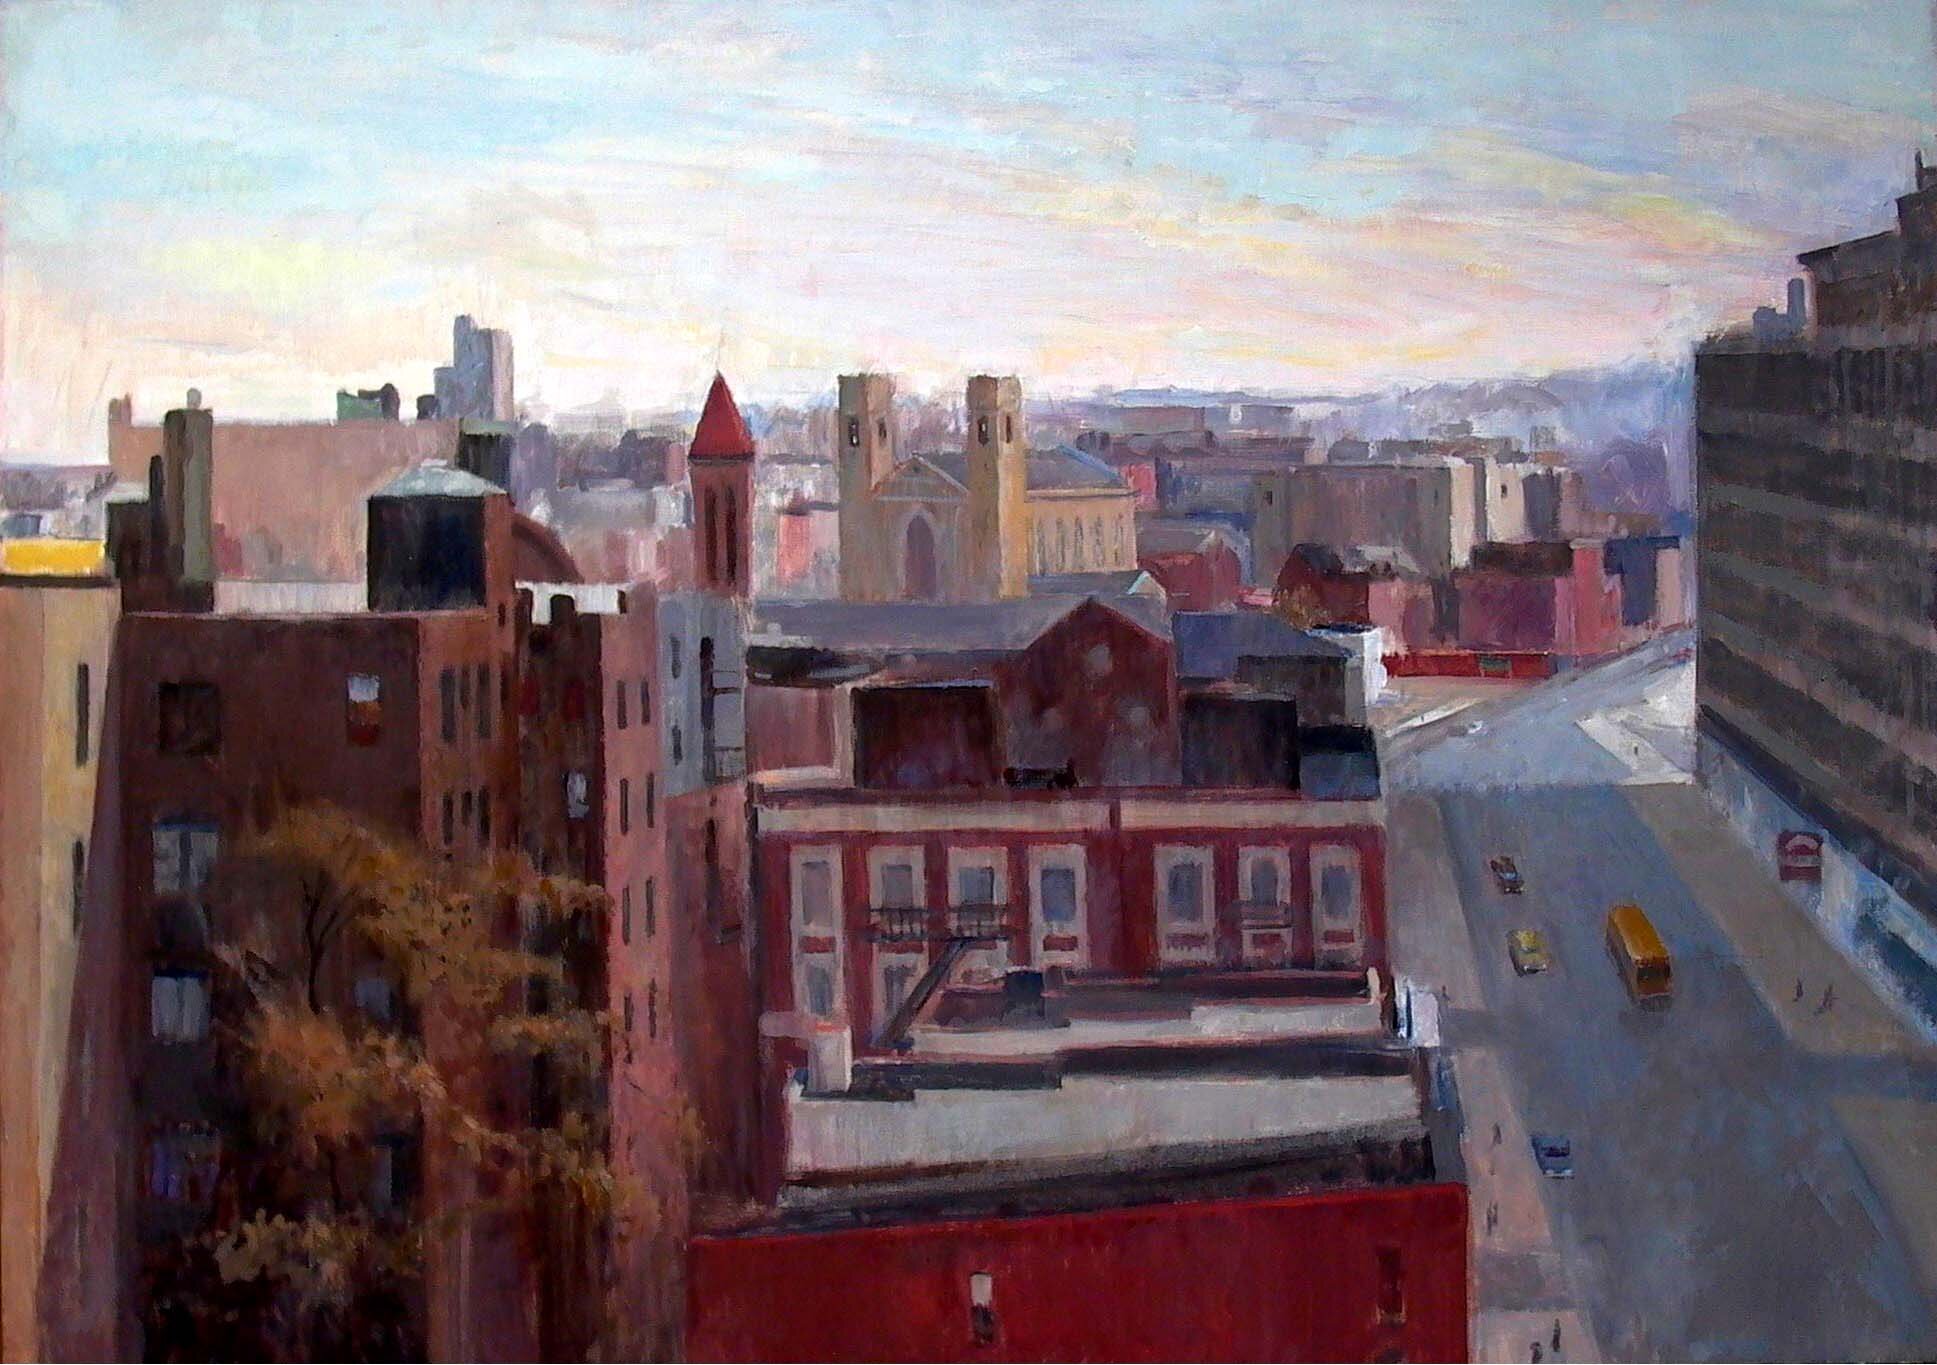 Clinton Hill, 30 x 42 inches, oil on linen, 1993.